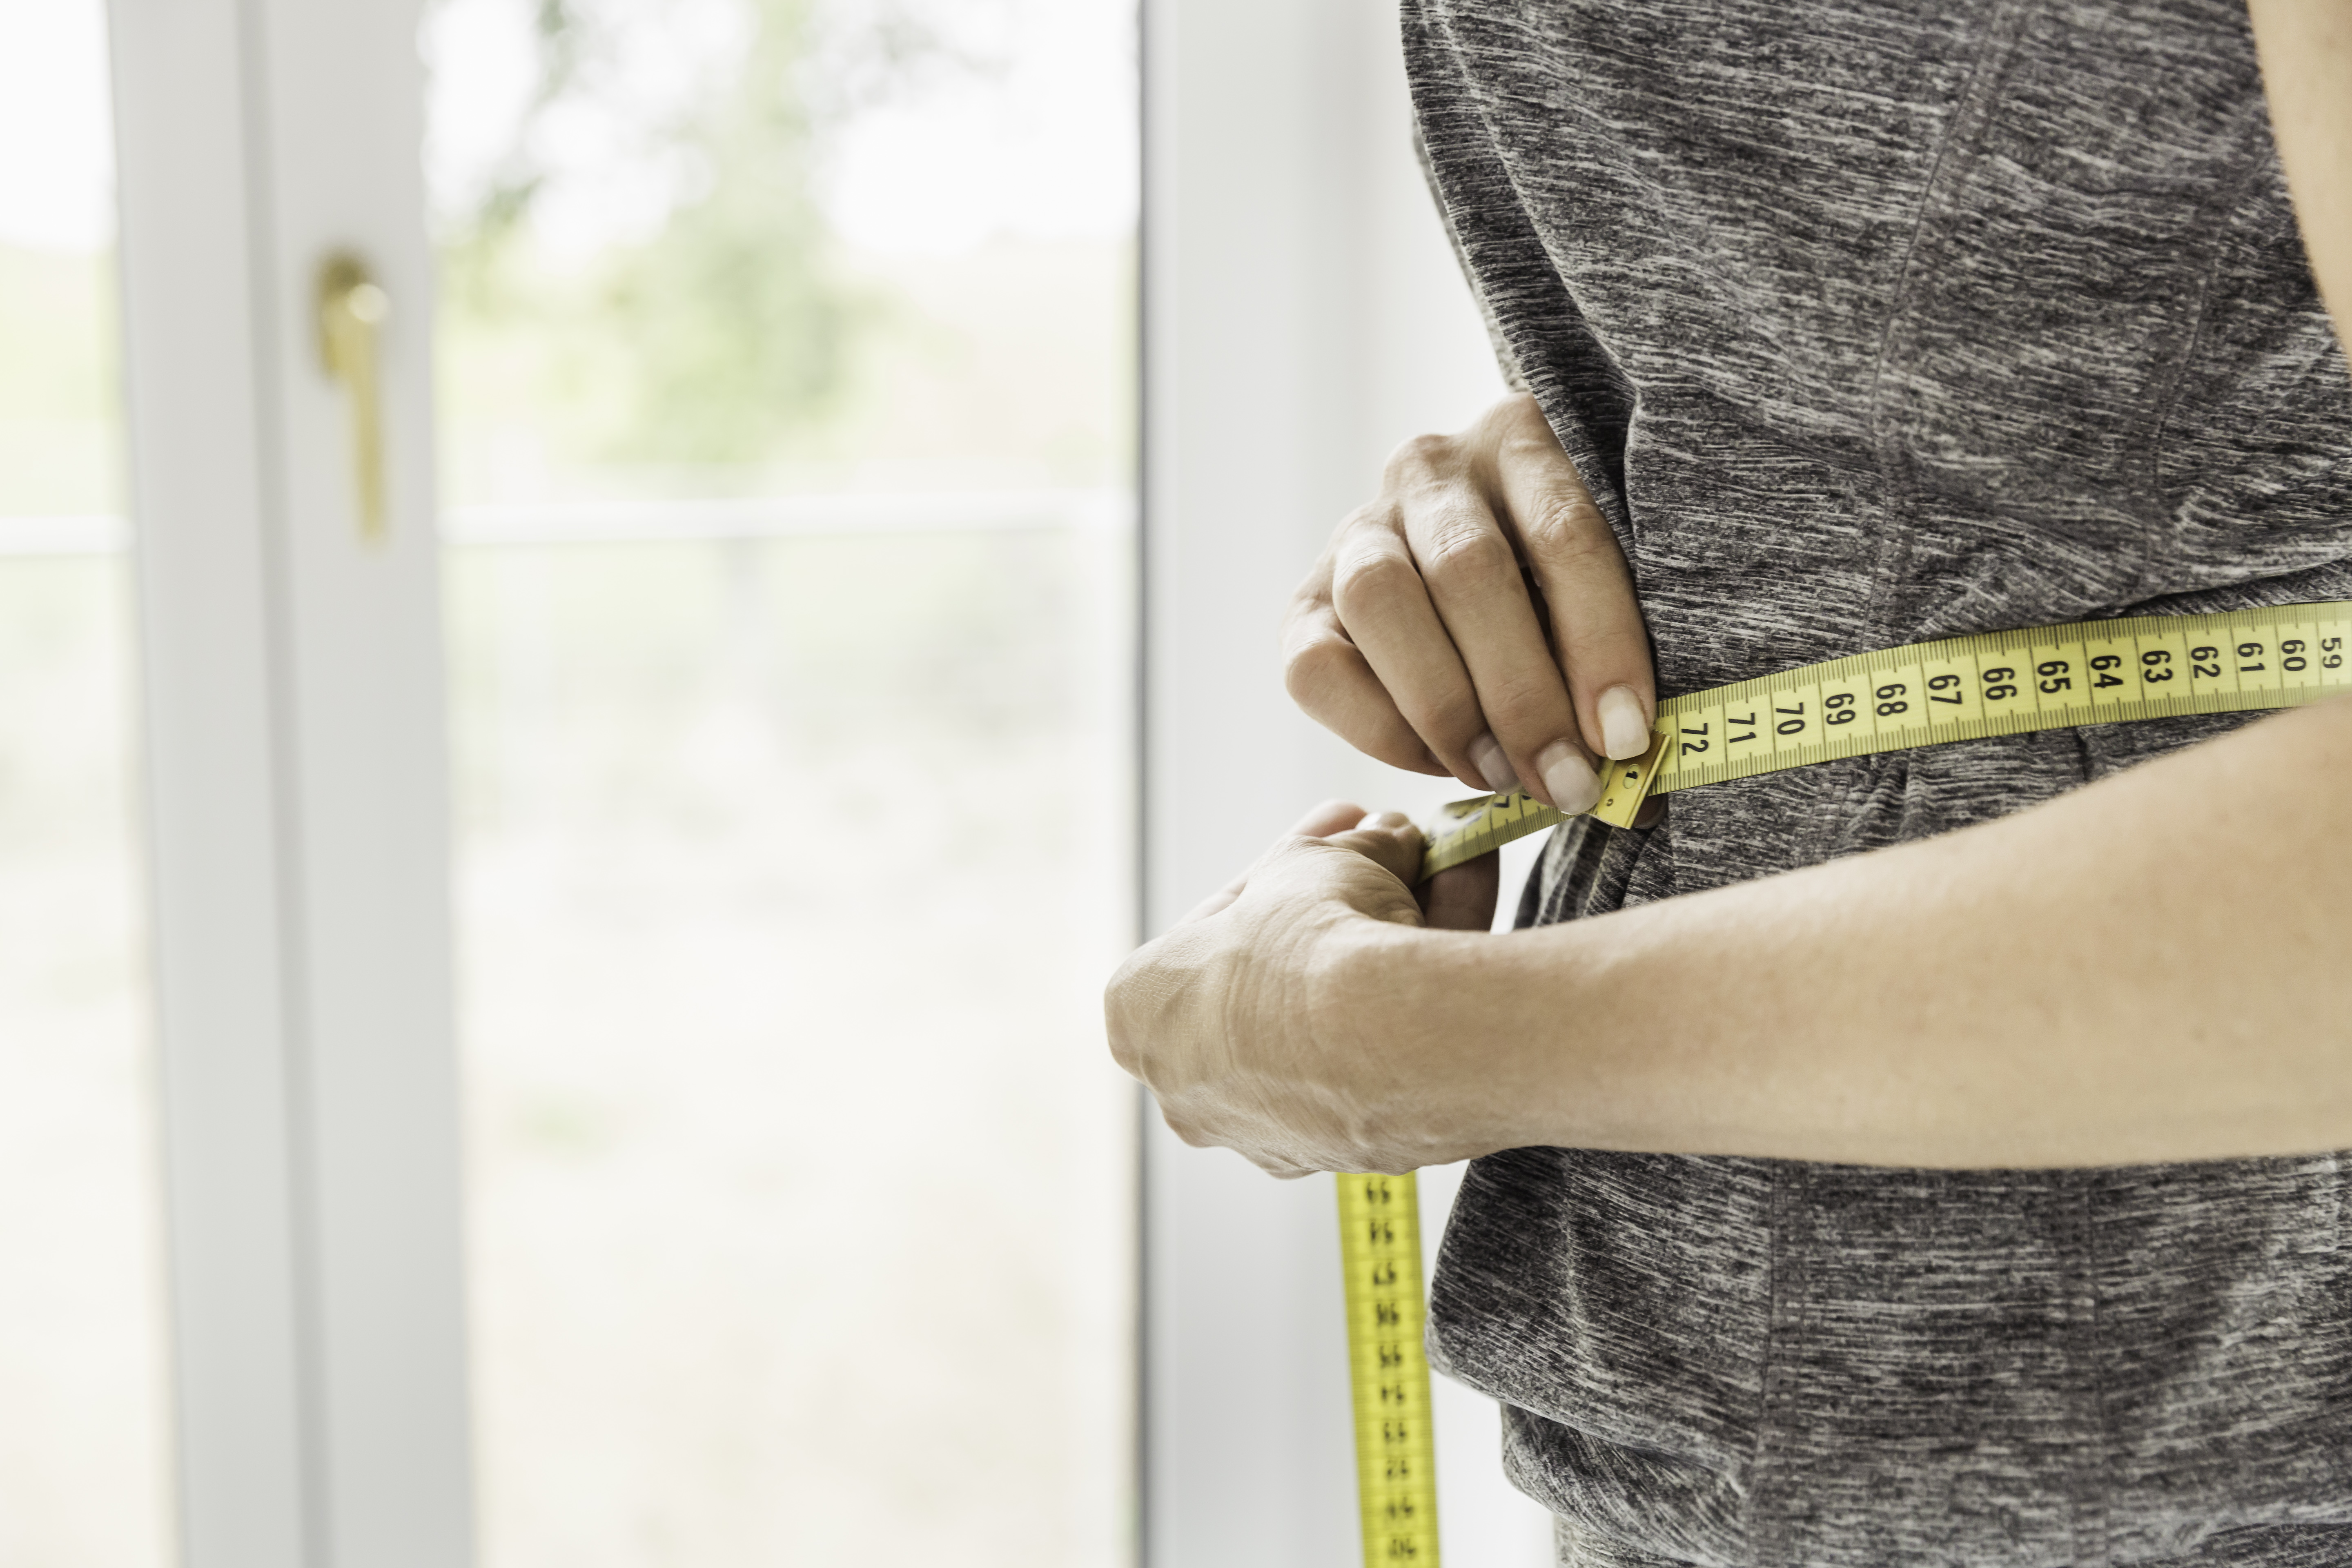 How to Measure Body Fat Without Calipers